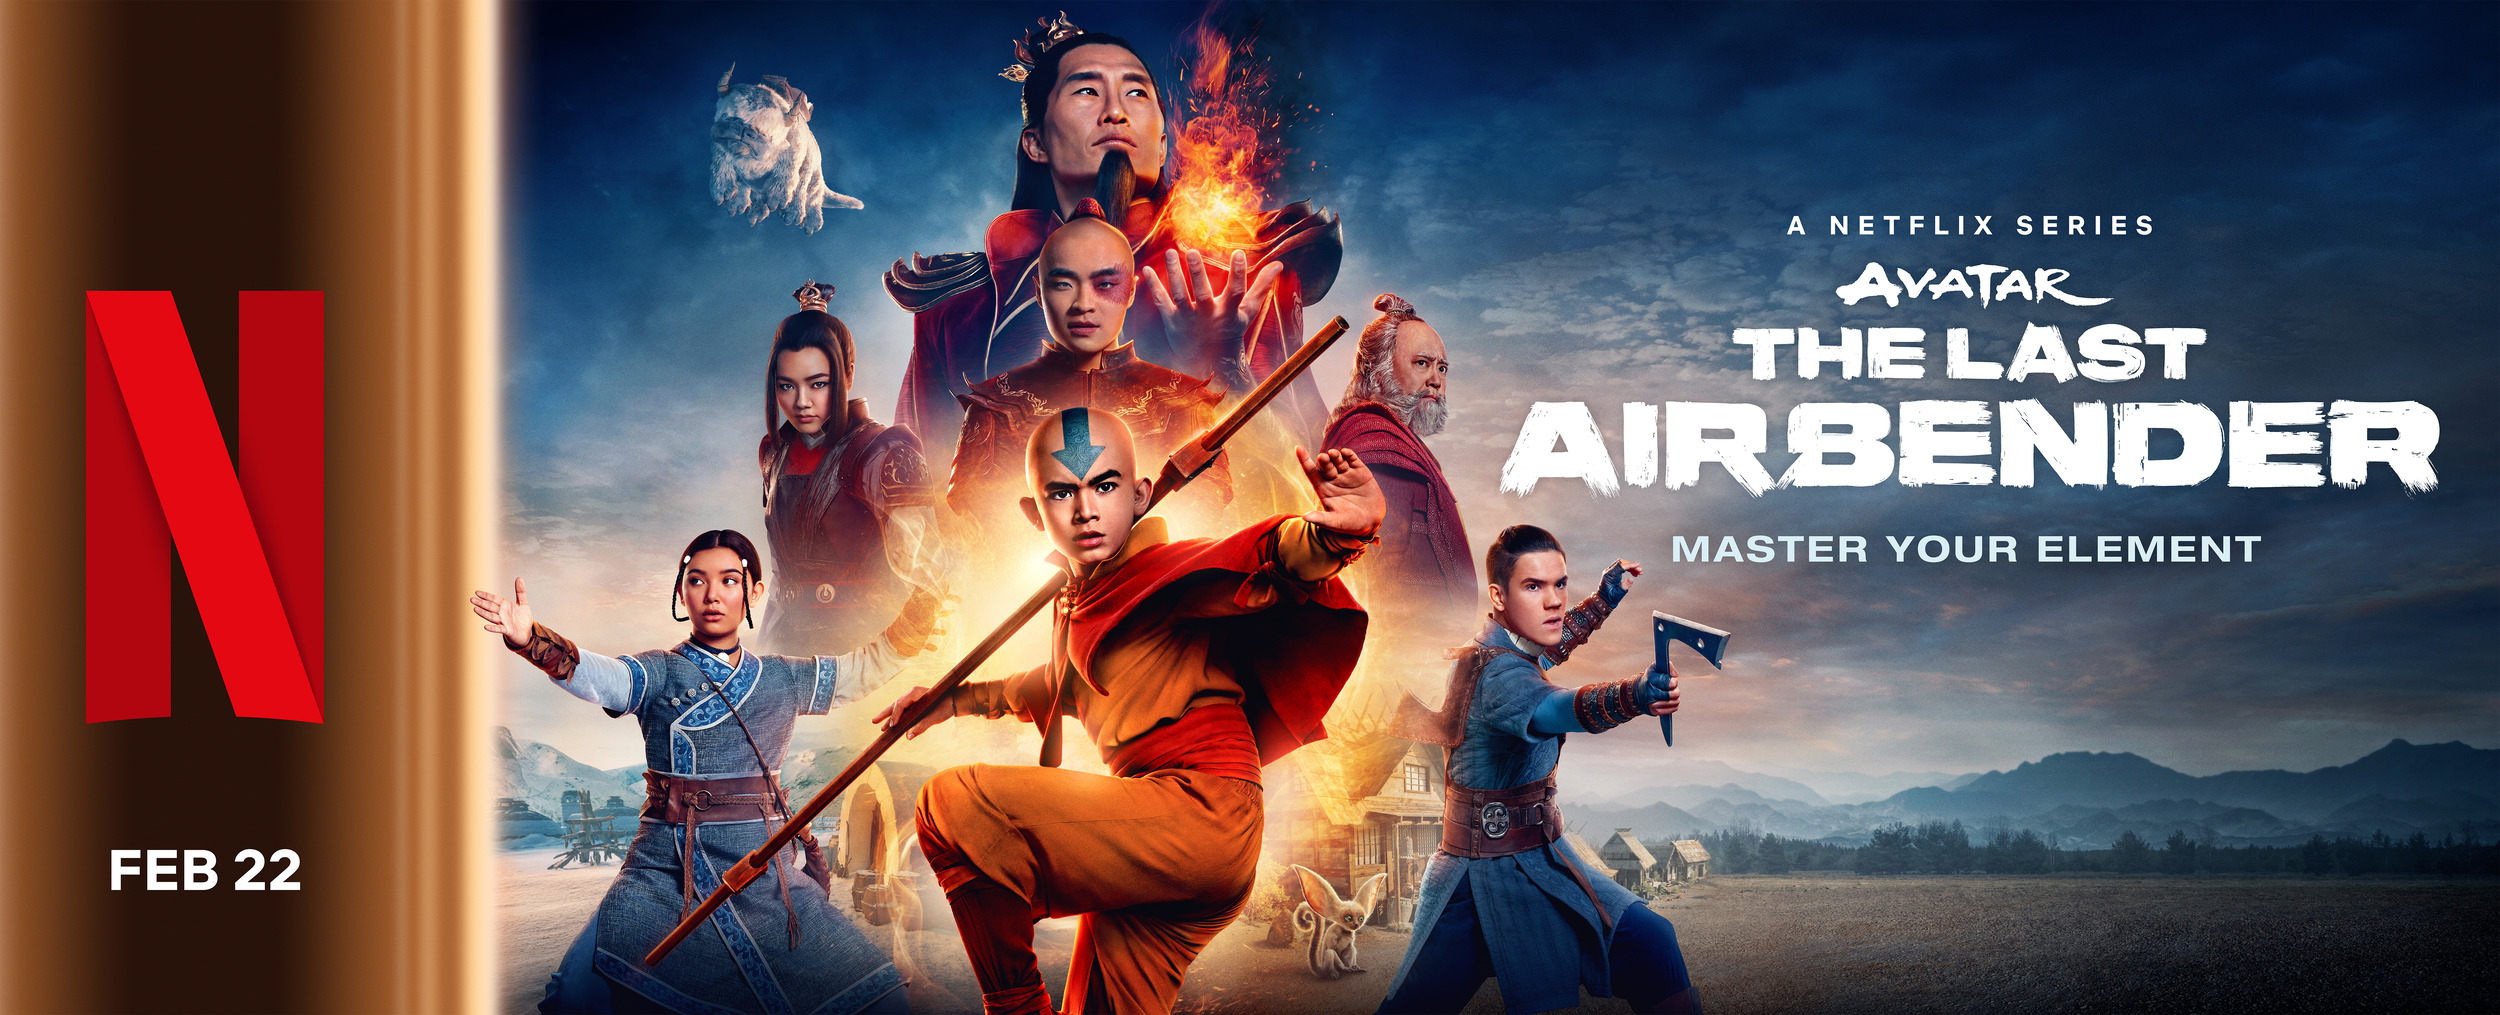 Mega Sized TV Poster Image for Avatar: The Last Airbender (#22 of 24)